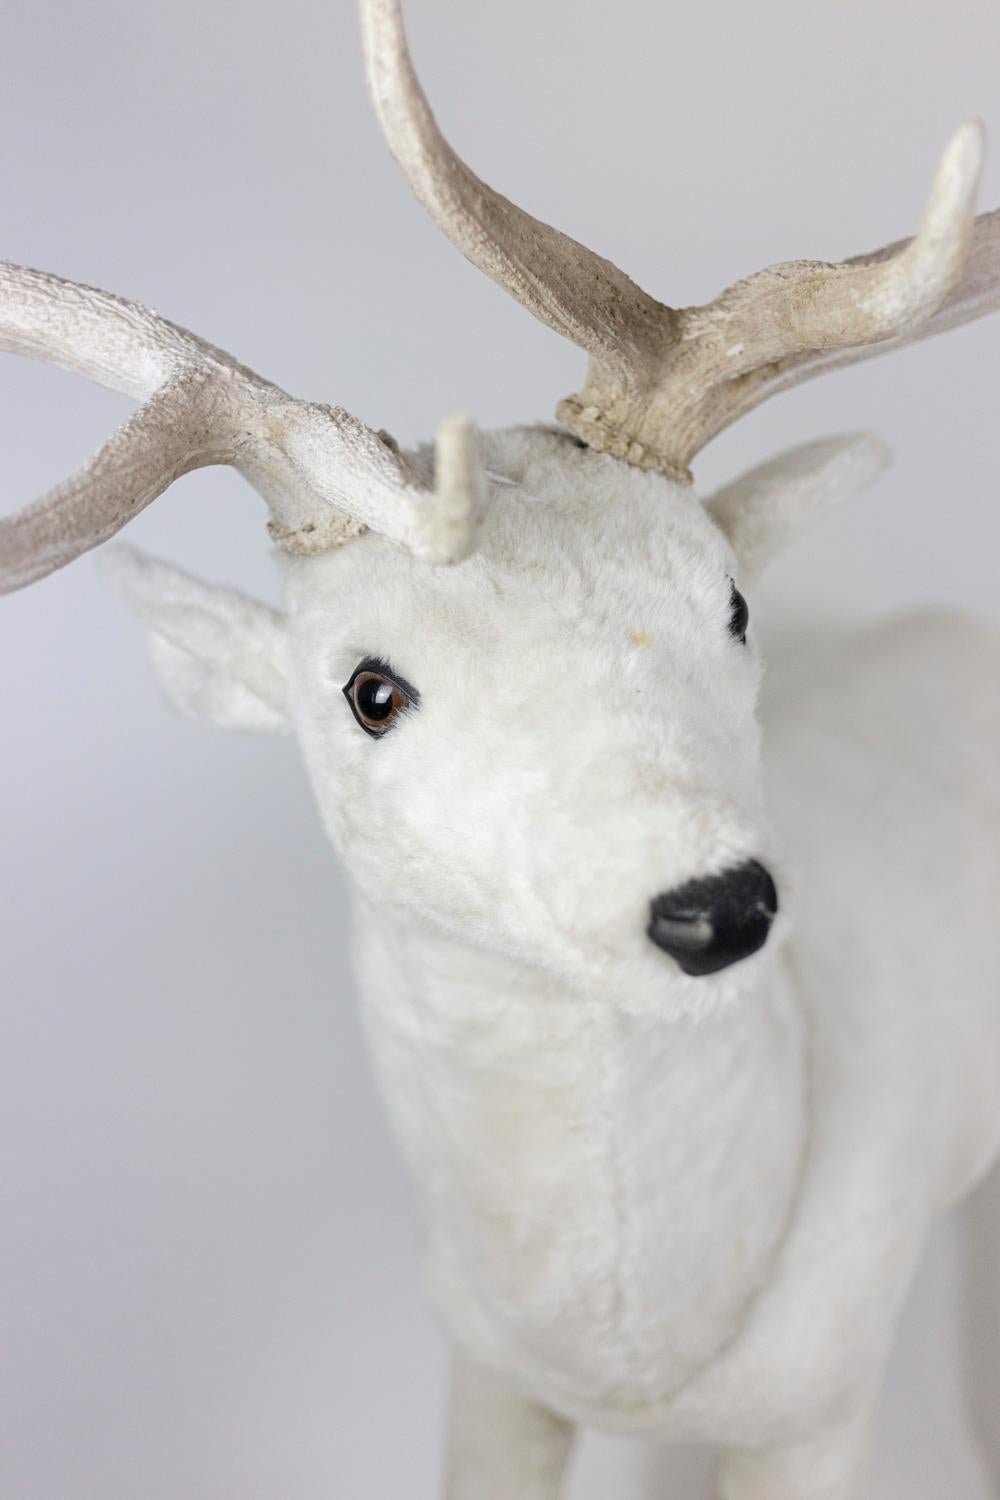 Large removable stuffed toy figuring a white deer. Deer antlers in resin.

Work realized in the 20th century.